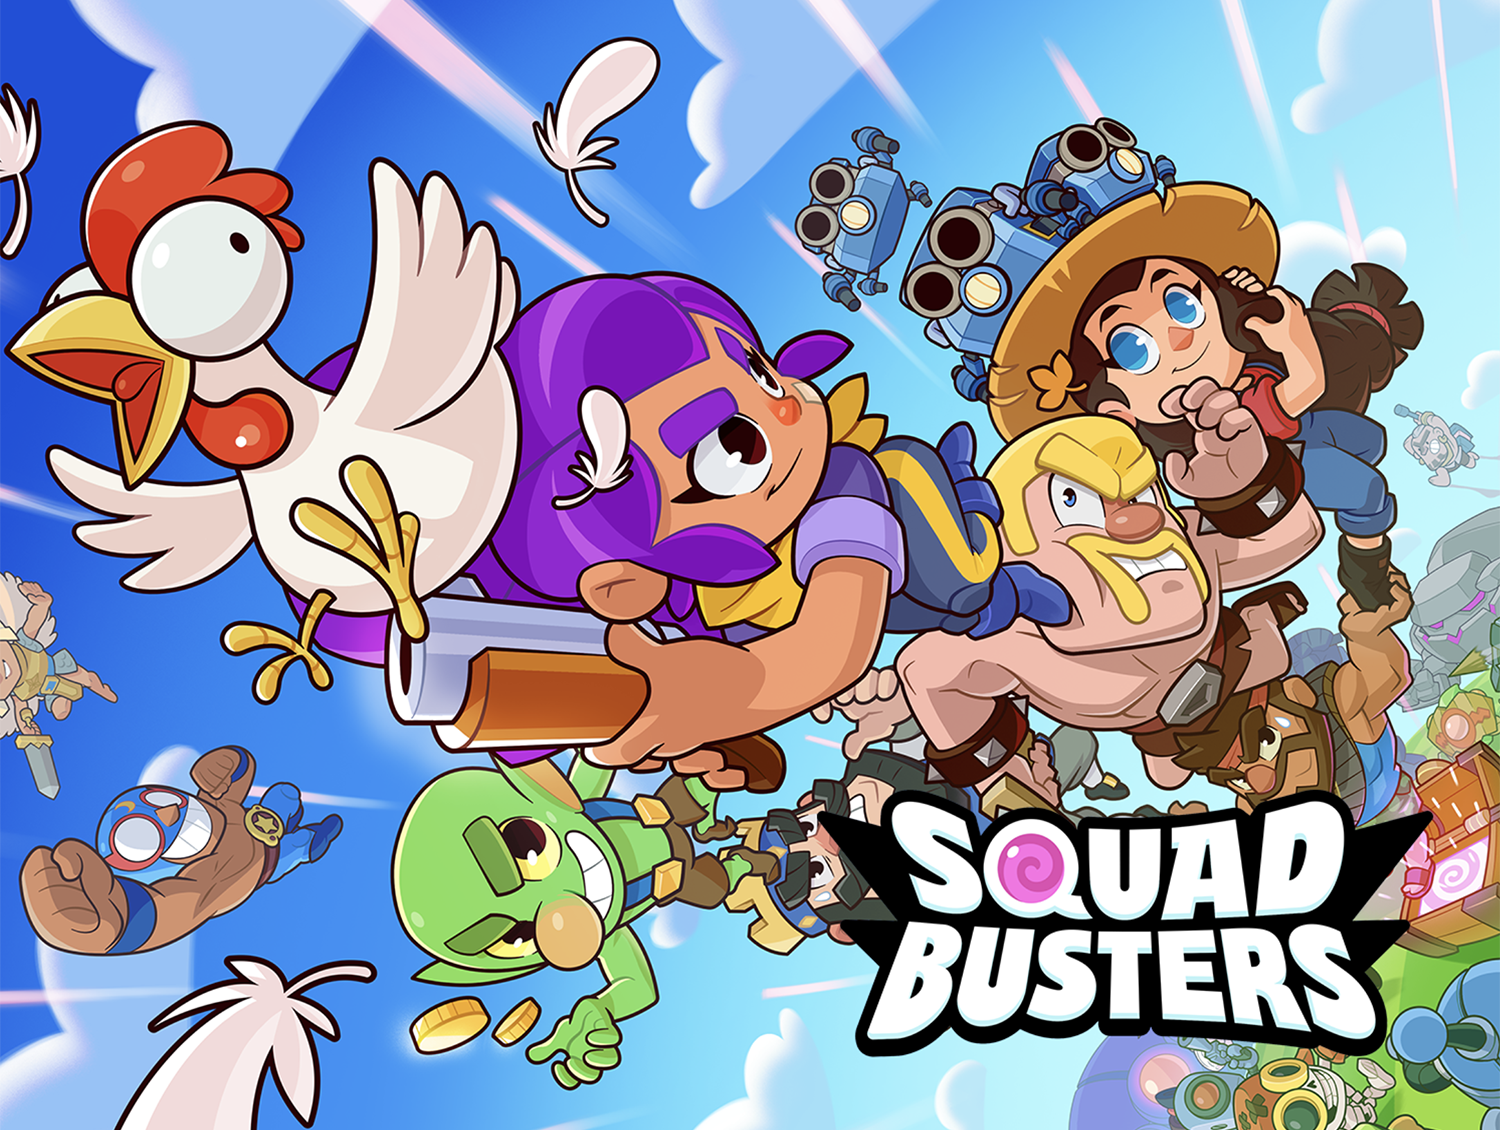 Squad Busters is Soft-Launching on April 23rd